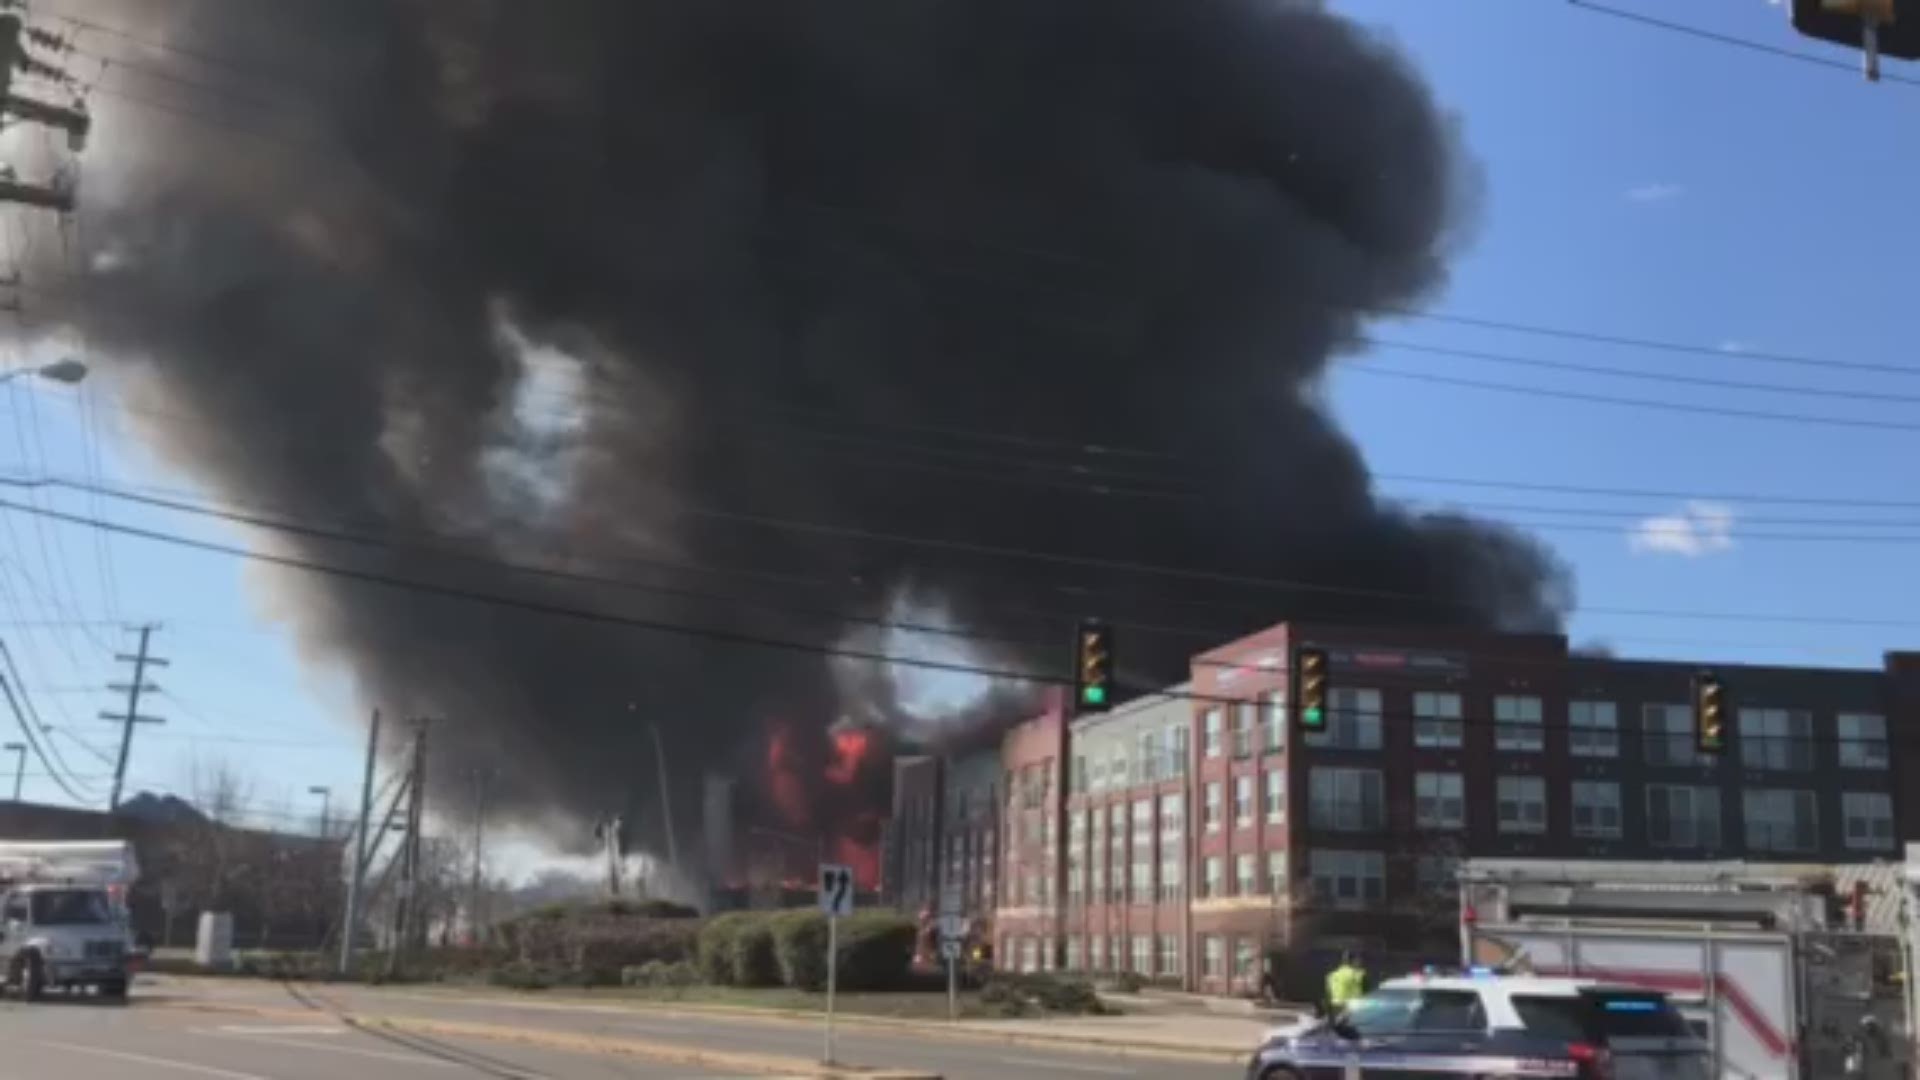 No firefighter or civilian injuries have been reported in the fire of the five-story building. Thick smoke was visible all across the DMV.